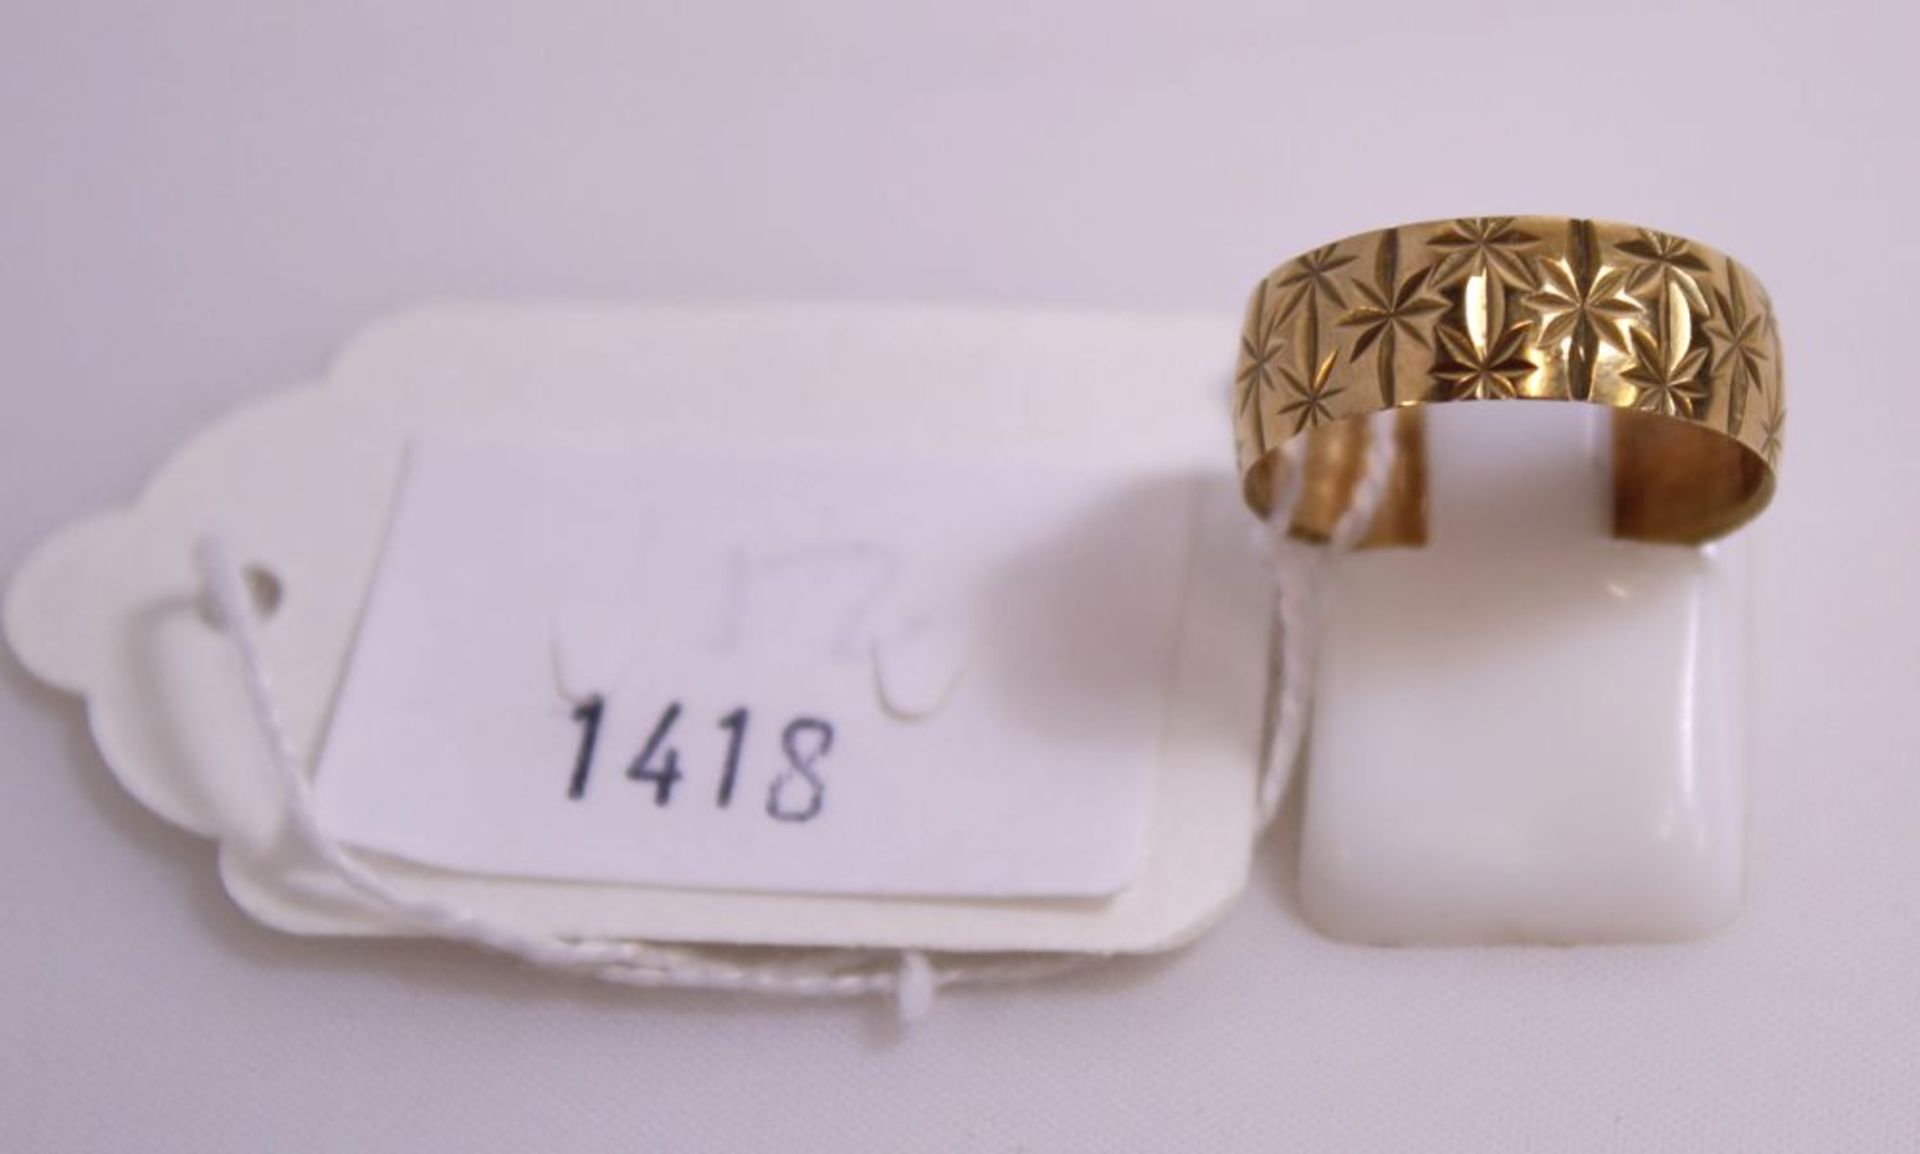 A 9ct Gold Ring with Star of Bethlehem design (Size O½) 3g (Est. £40-£70)